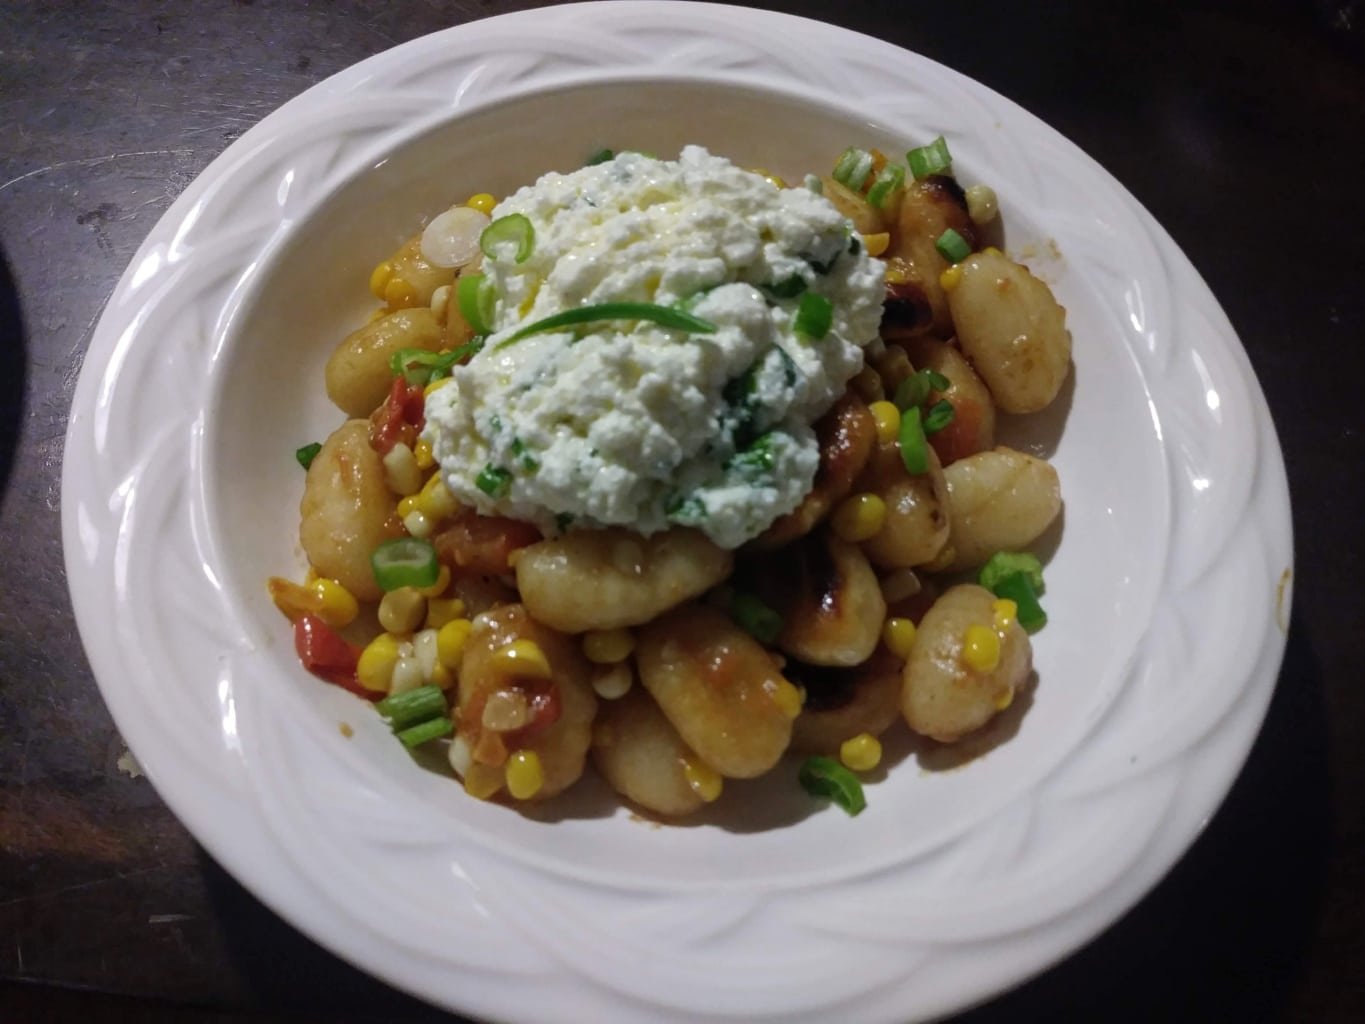 Pan Fried Gnocchi with Fresh Ricotta, Corn, and Tomatoes – 3rd Dinnerly Meal Kit